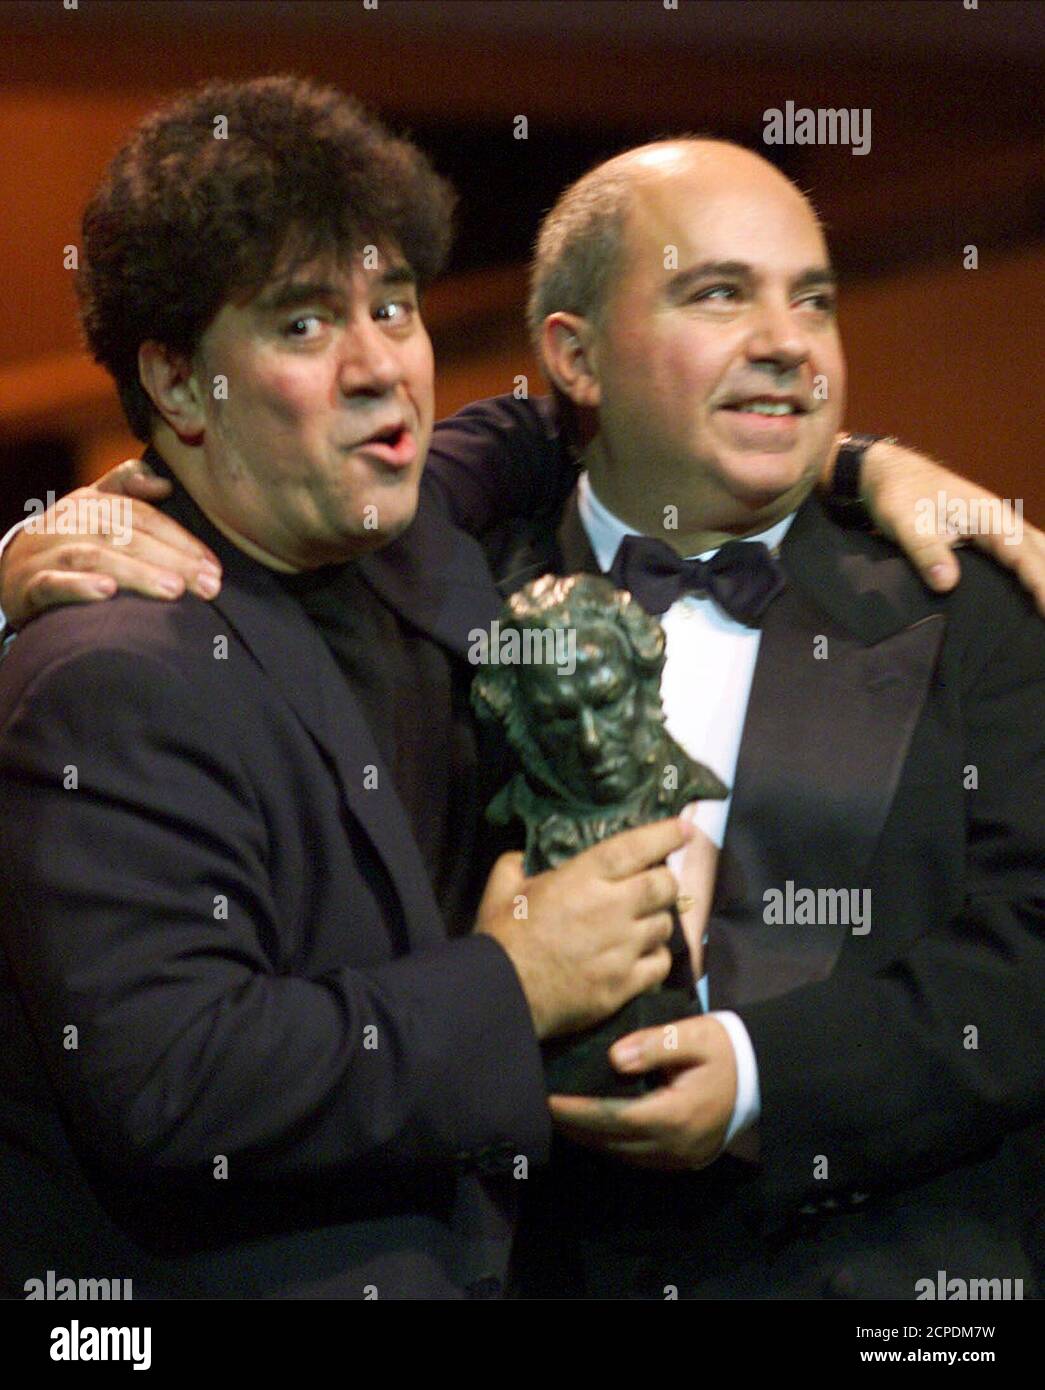 Director Pedro Almodovar and his brother Agustin (R) receive the Goya prize during the Spanish Film Academy awards in Barcelona January 30. Almodovar won the prize for best director and his brother for the best film, 'Todo sobre mi madre' (All About My Mother). The Goyas are the Spanish equivalent to the Oscars.  GN Stock Photo